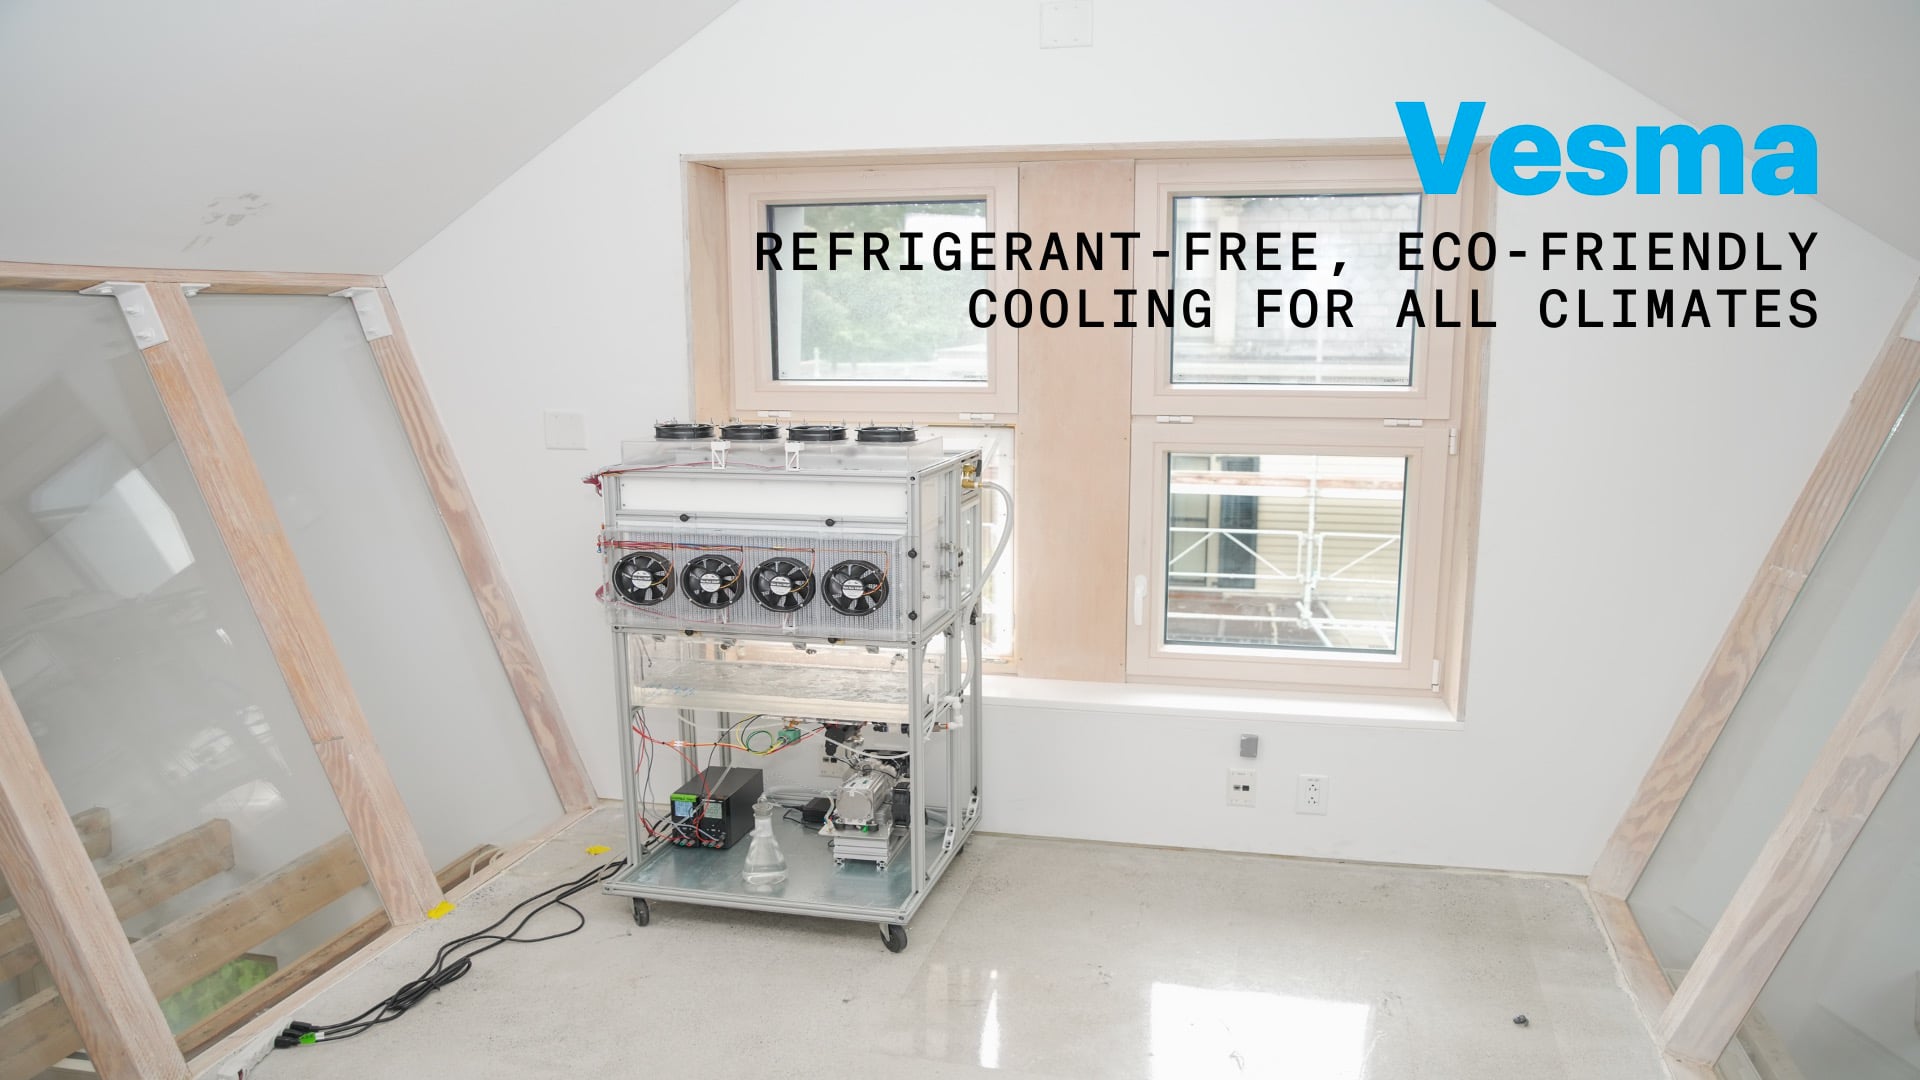 Vesma - Refrigerant-Free, Eco-Friendly Cooling for All Climates